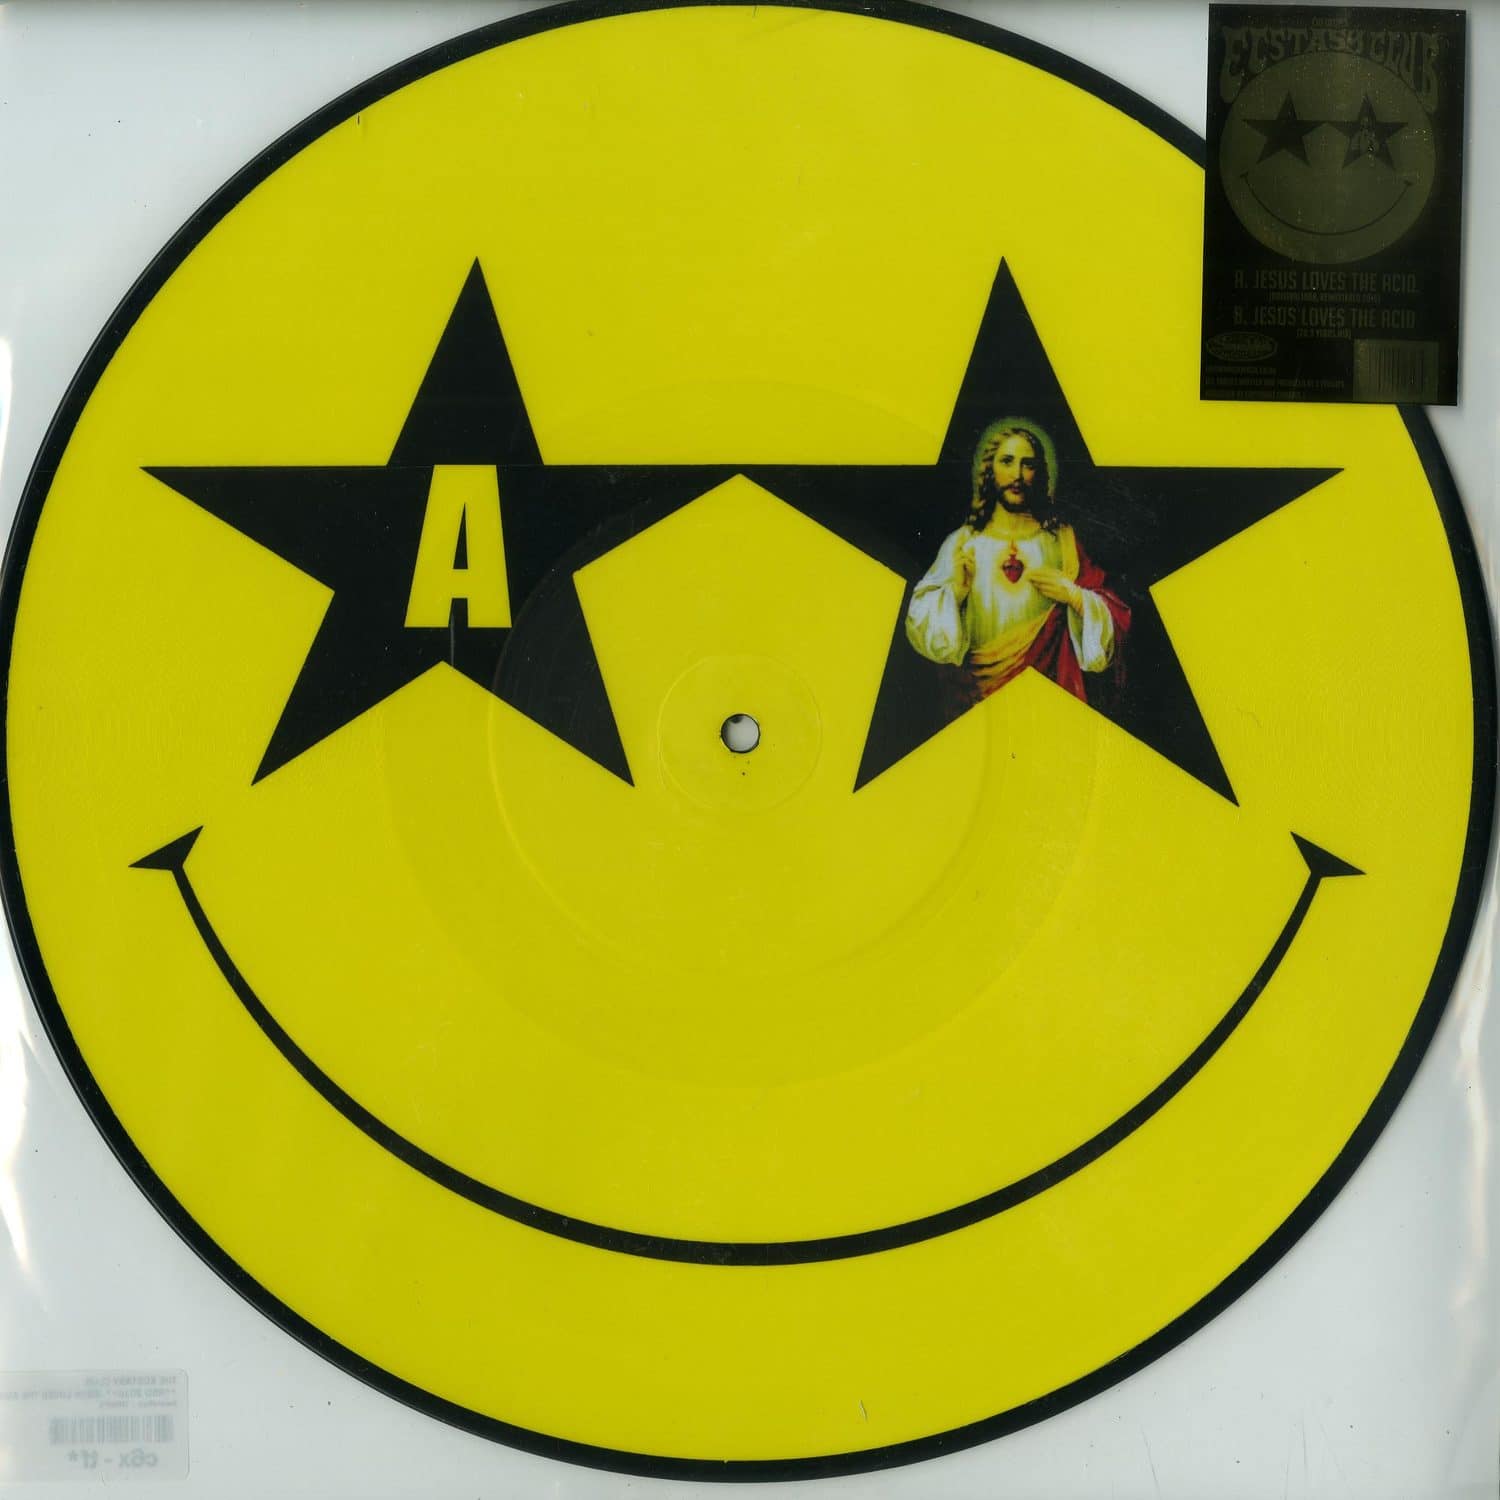 The Ecstasy Club - **RSD 2016** JESUS LOVES THE ACID - 2016 PICTURE DISC